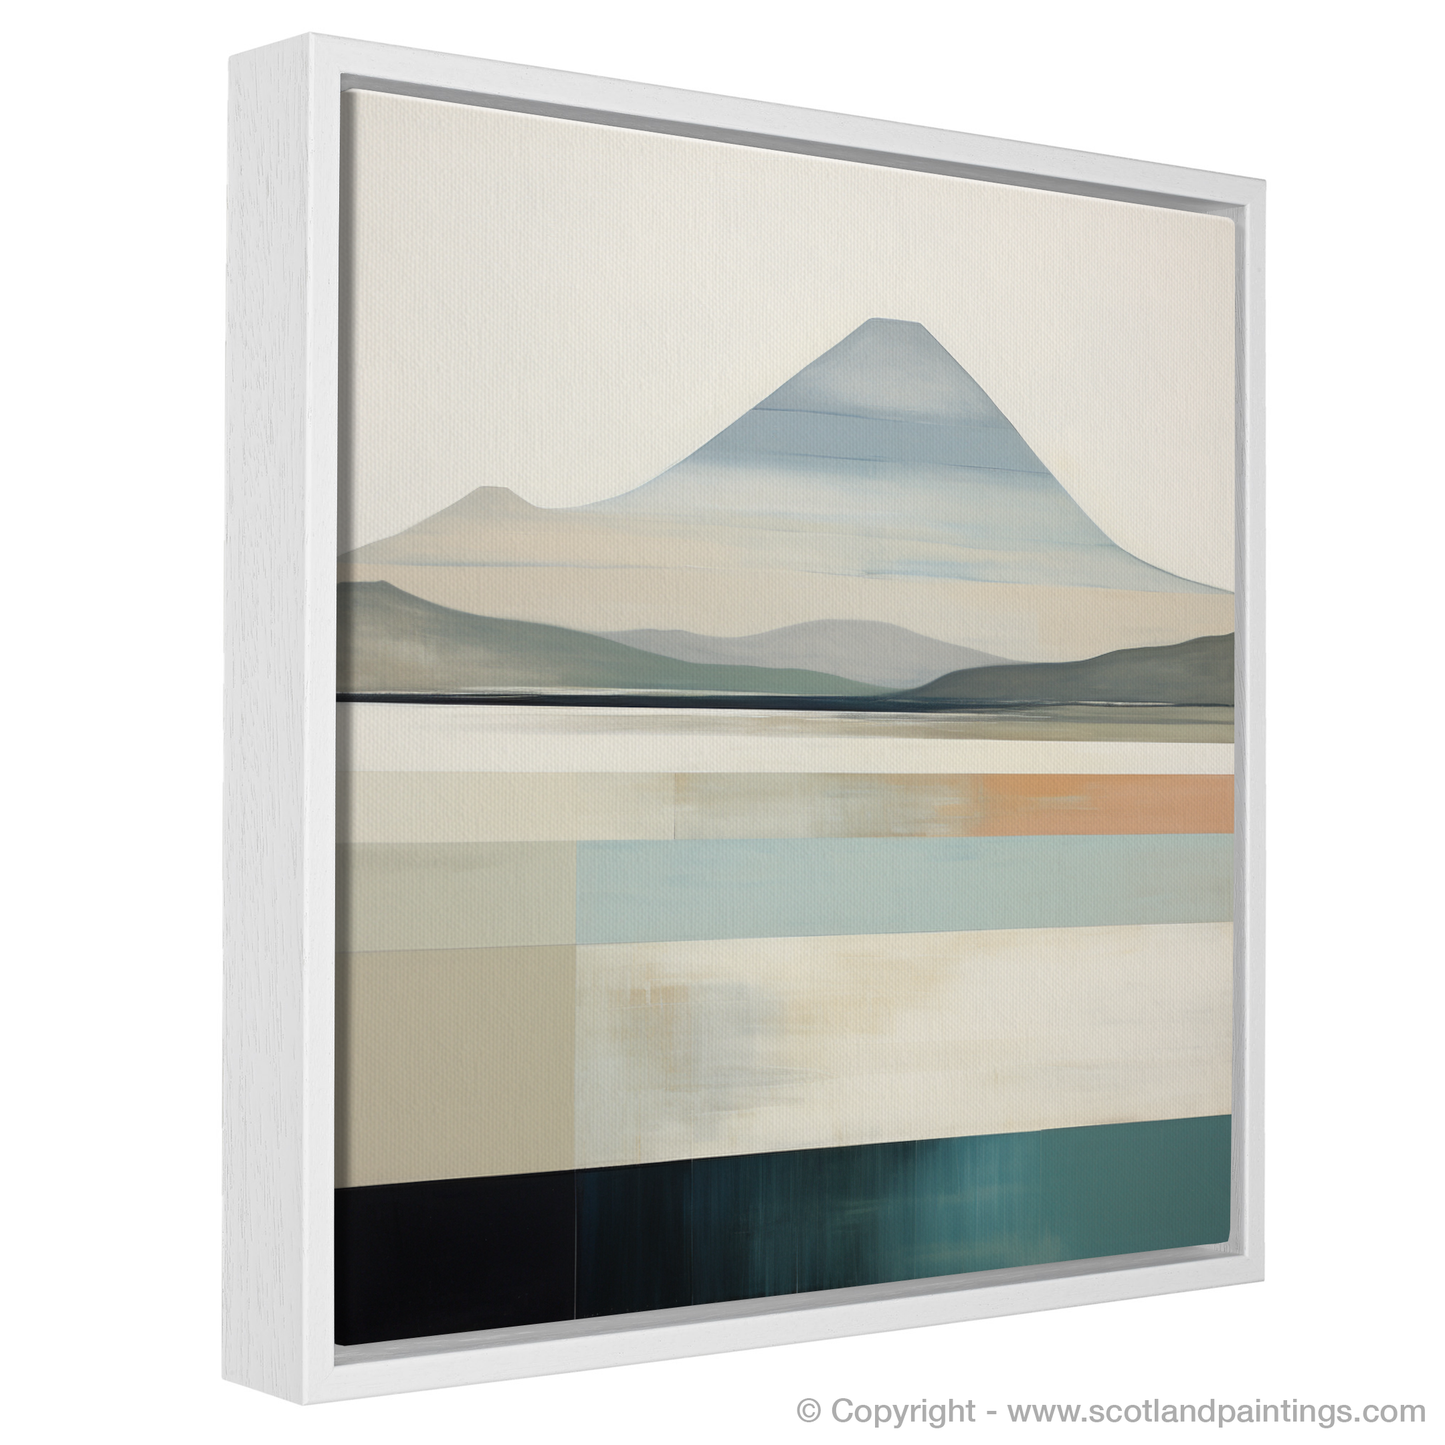 Painting and Art Print of Ben More entitled "Abstract Essence of Ben More".